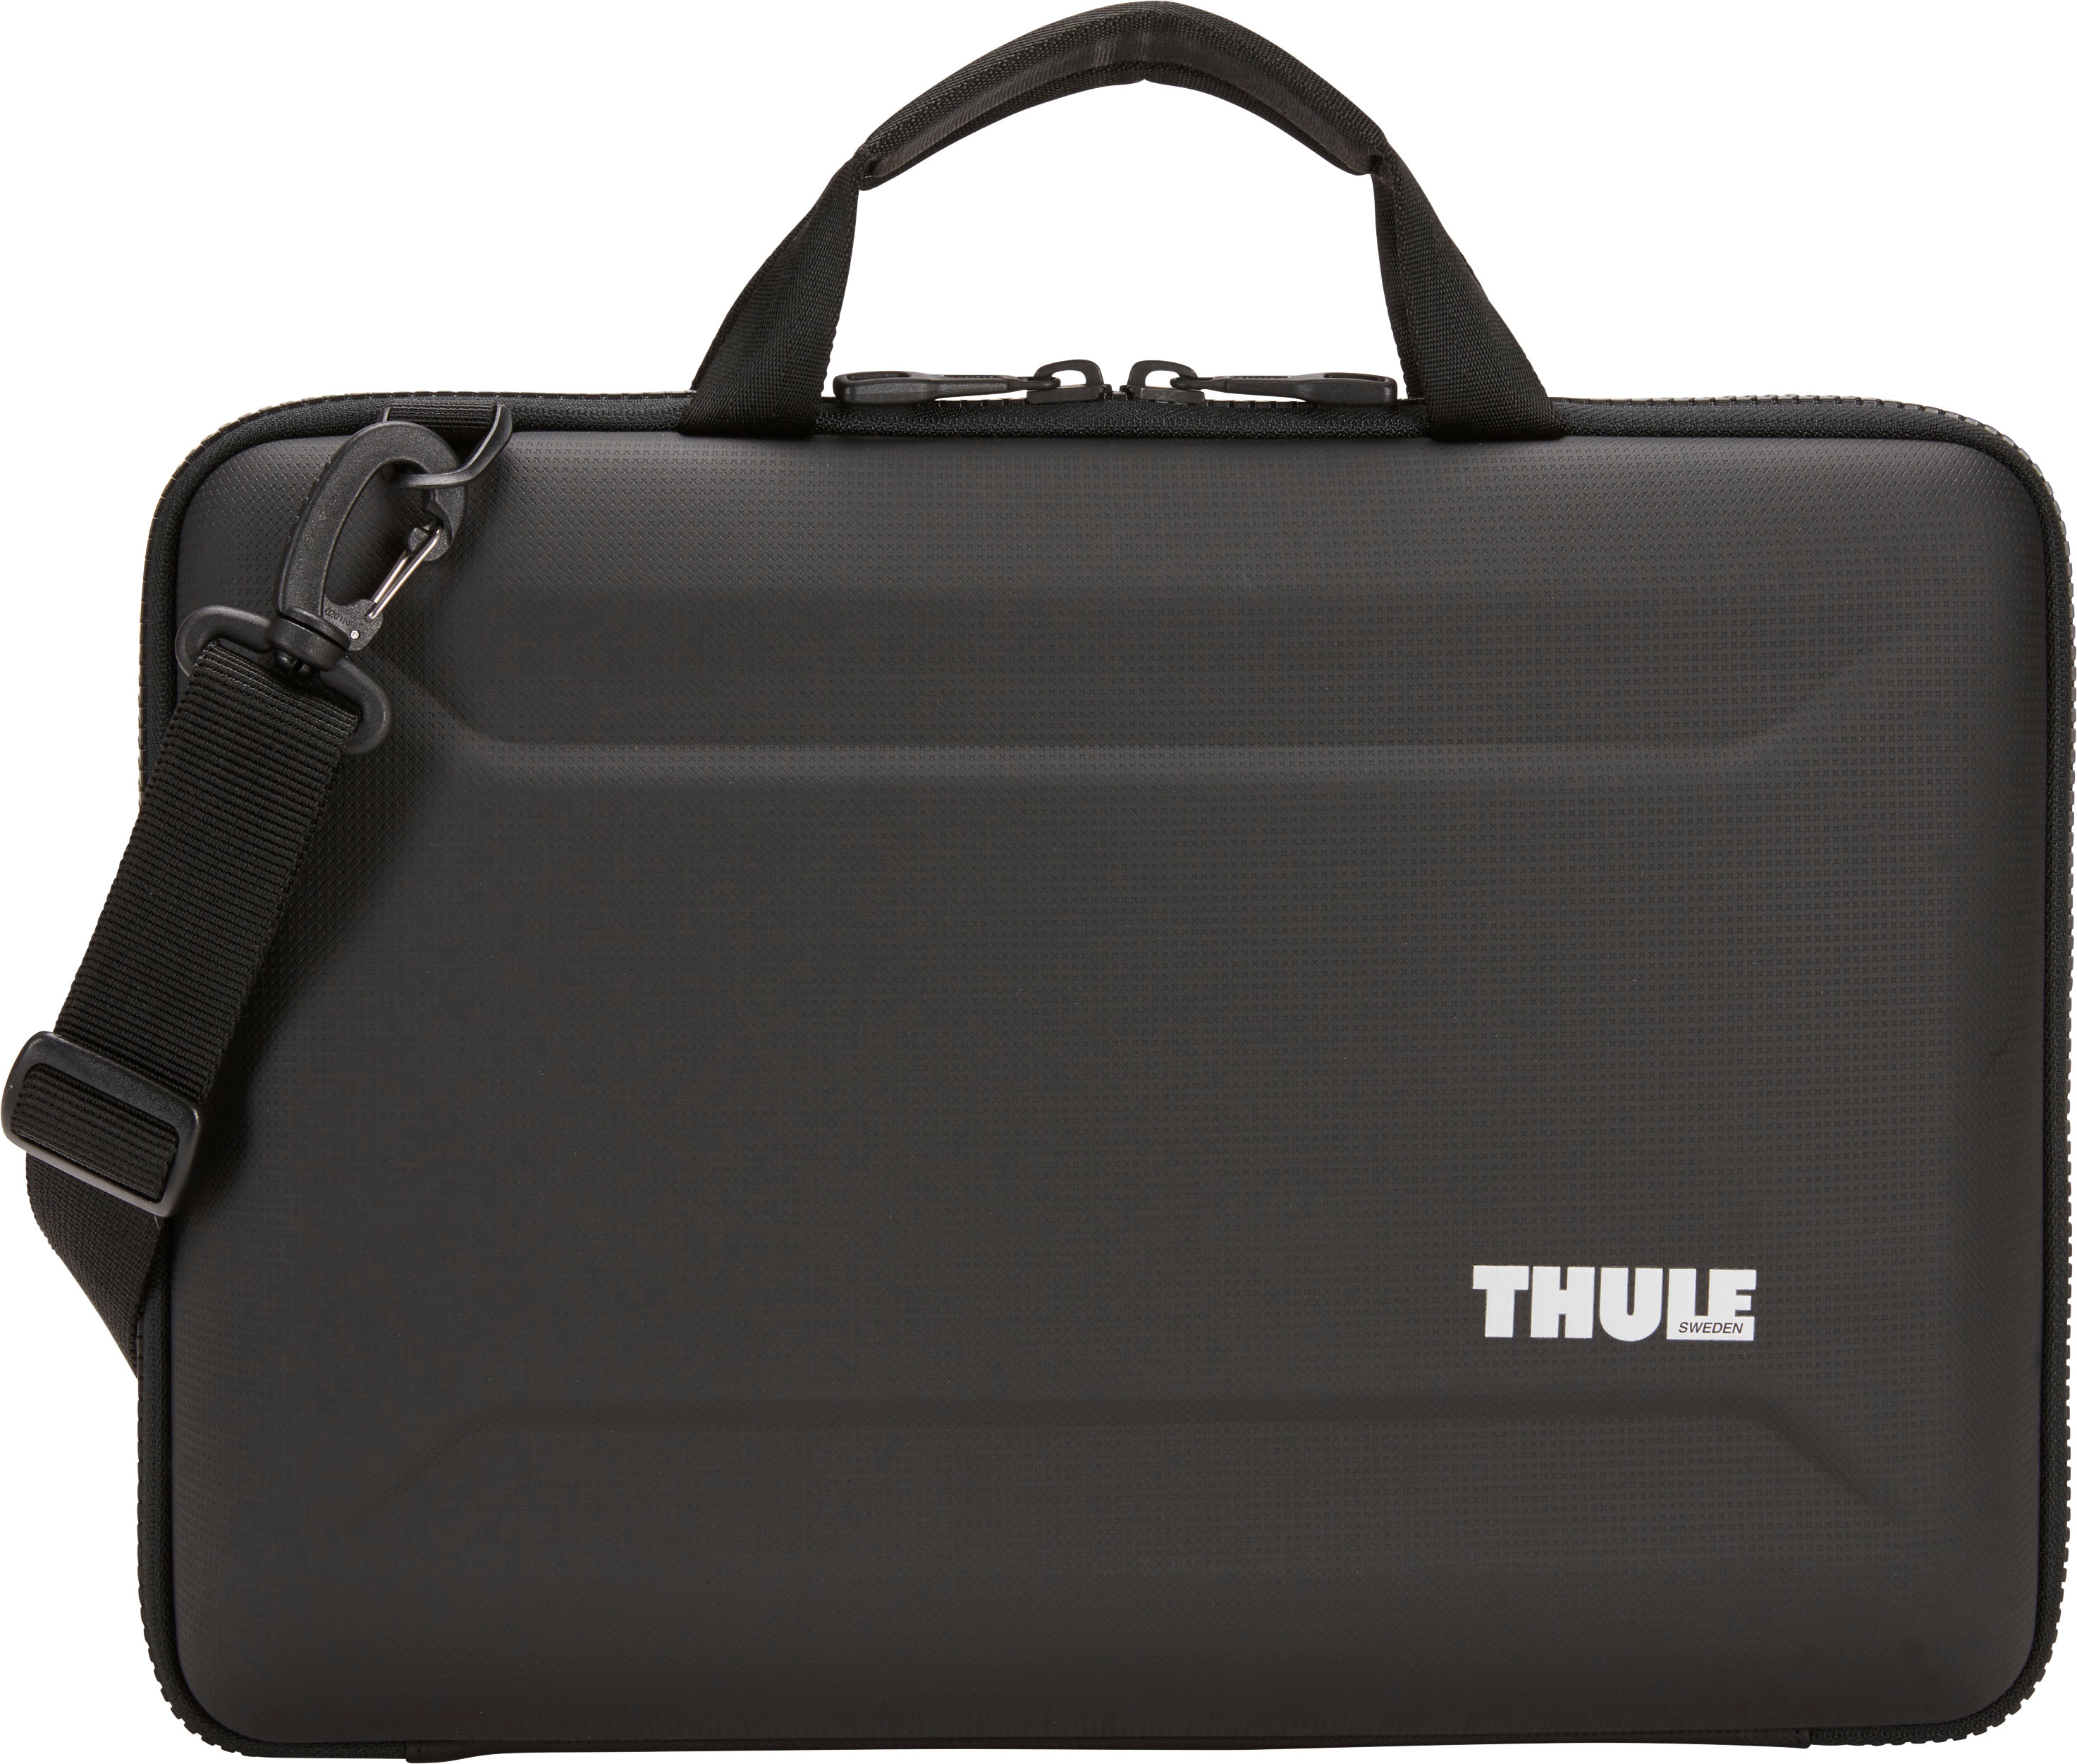 Back View: Thule - Gauntlet 4 Attaché Briefcase for all 16” Apple MacBook Pro Models, all 15” Apple MacBook Pro Models & 14.1" PC & Laptops - Black